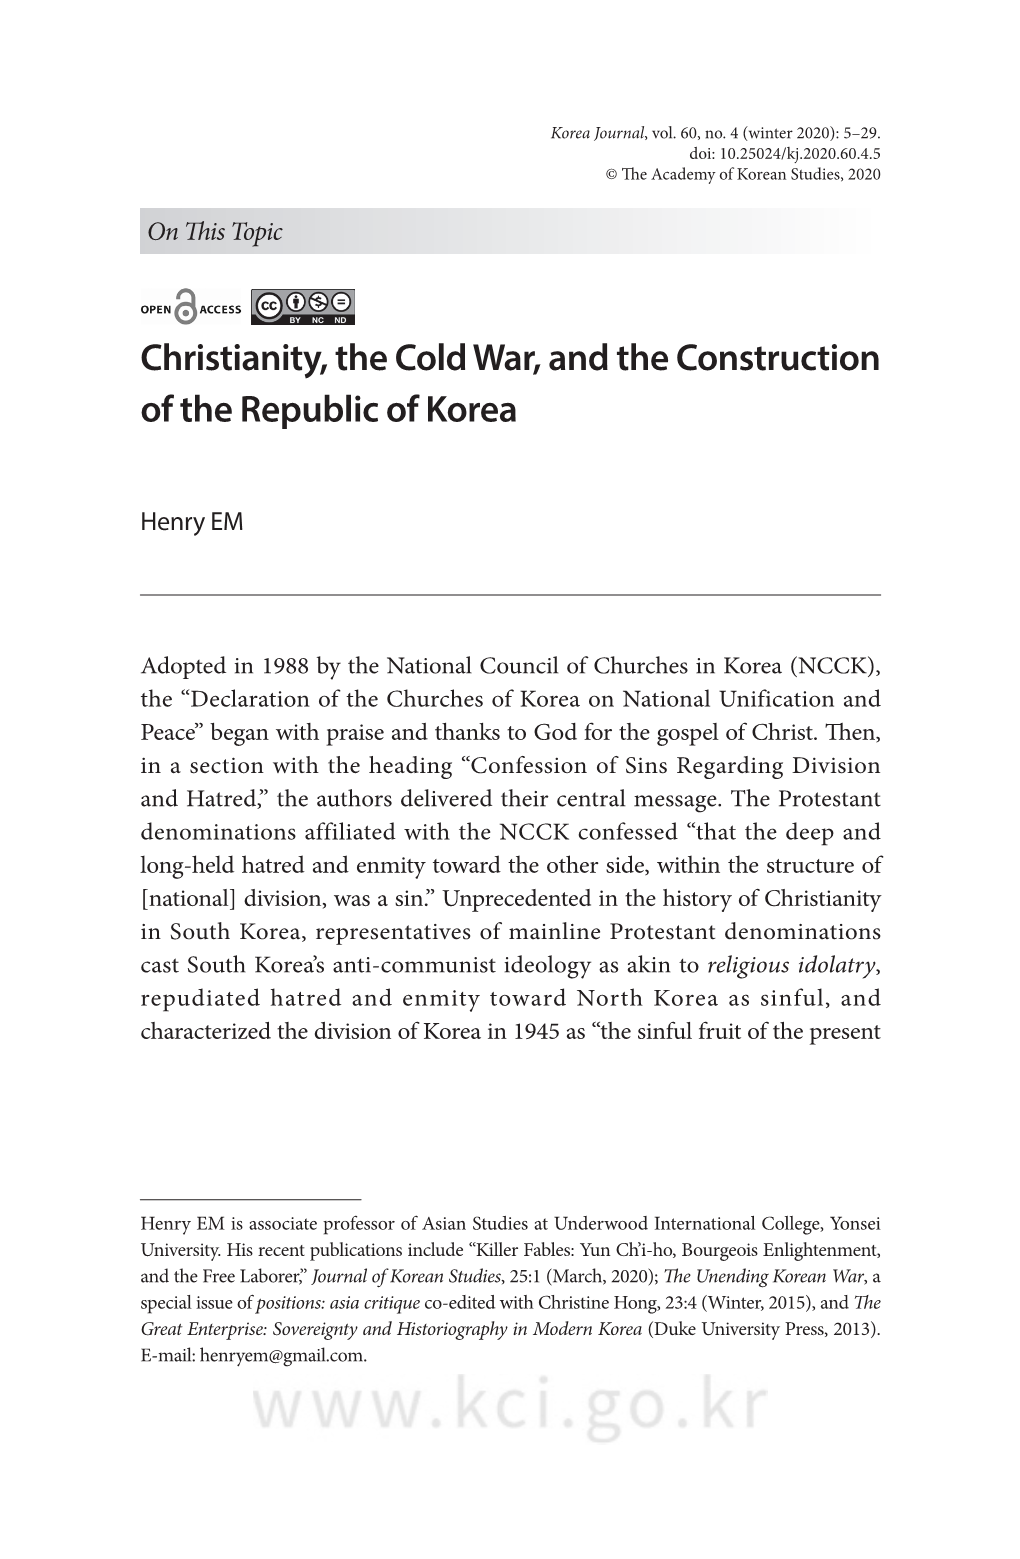 Christianity, the Cold War, and the Construction of the Republic of Korea